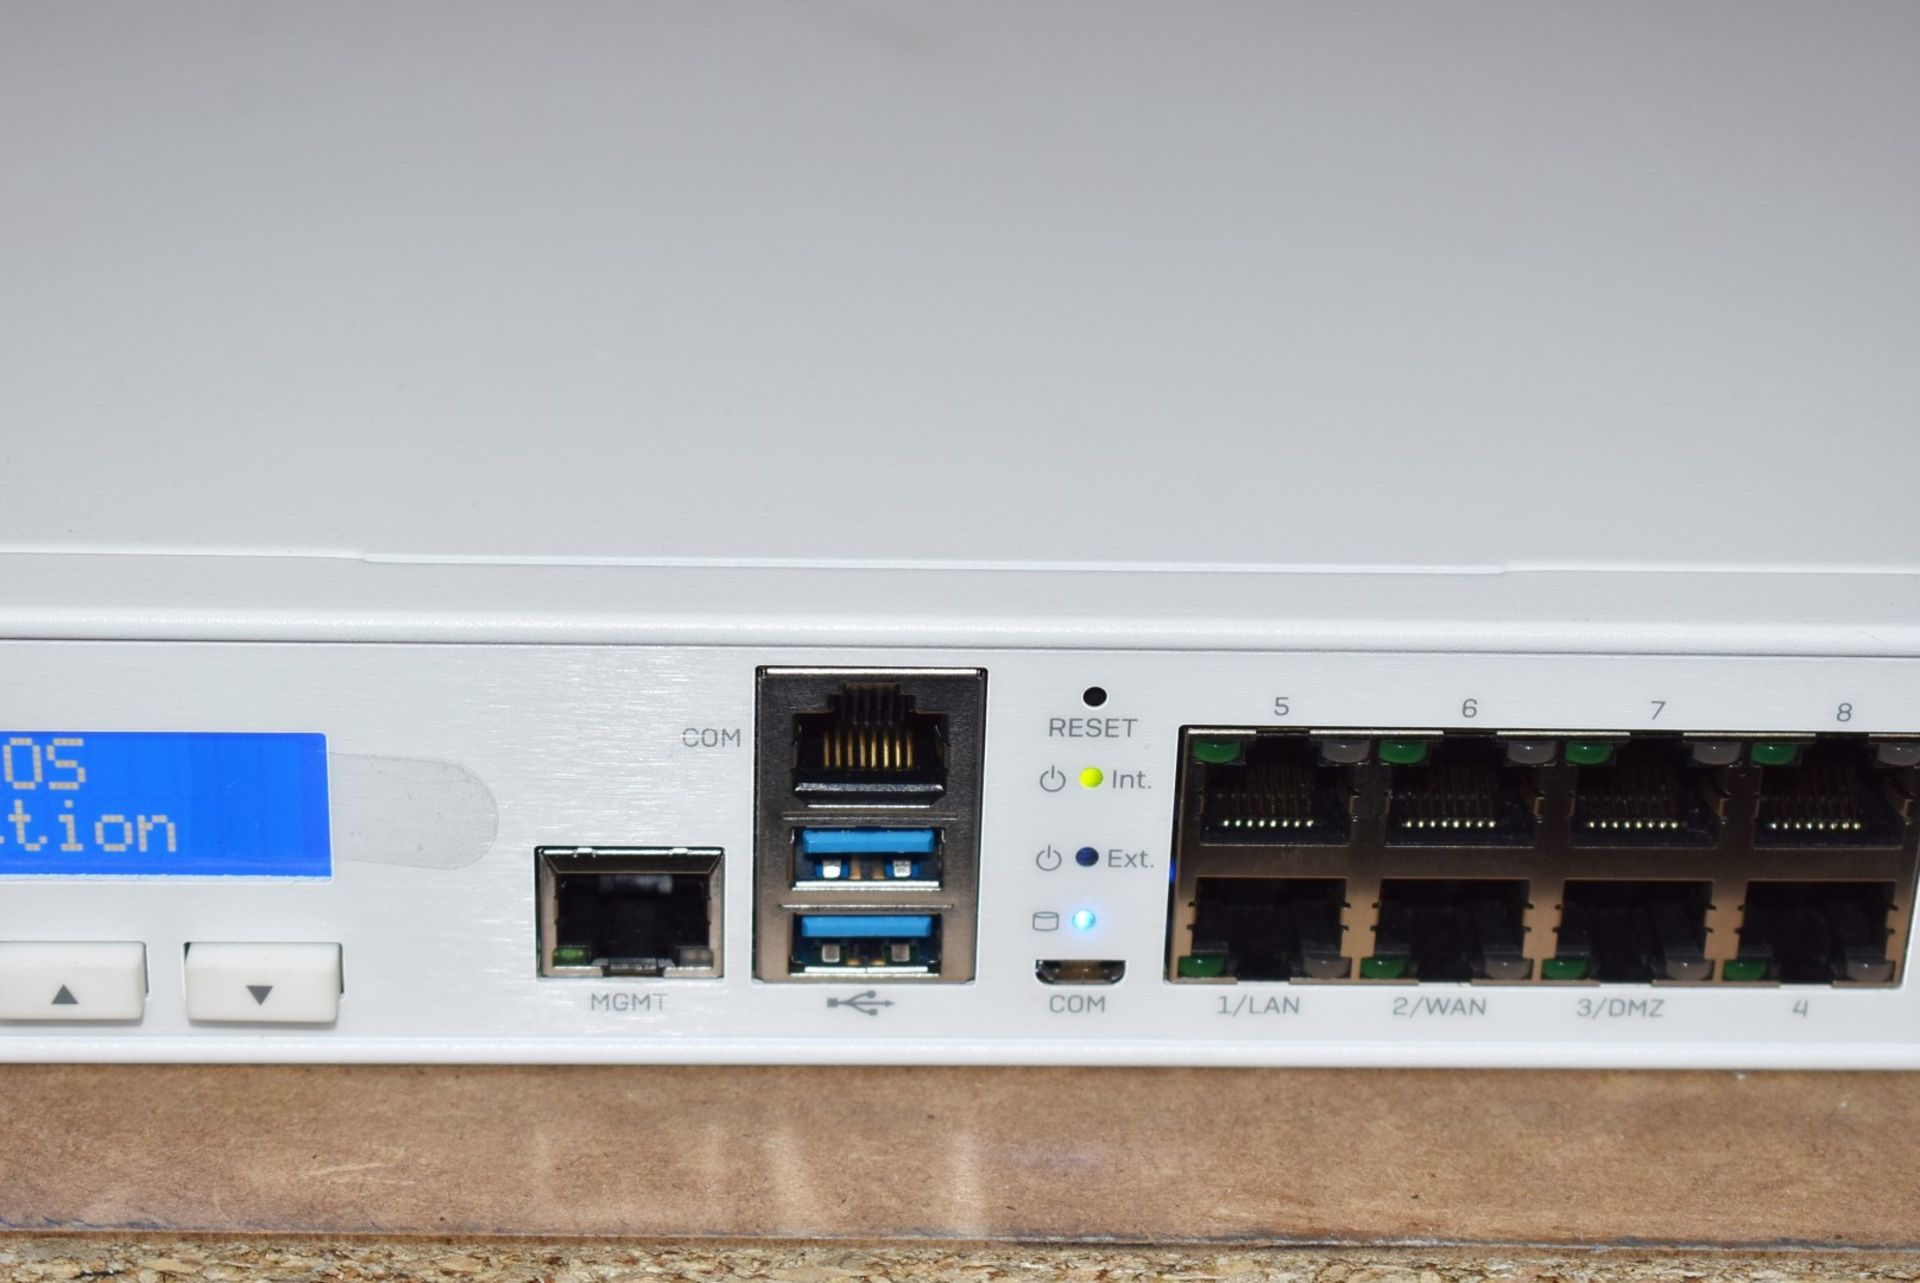 1 x Sophos XG430 Edge Firewall Appliance - Rev2 - Manufactured Jan 2019 - Includes Power Cable - - Image 8 of 11